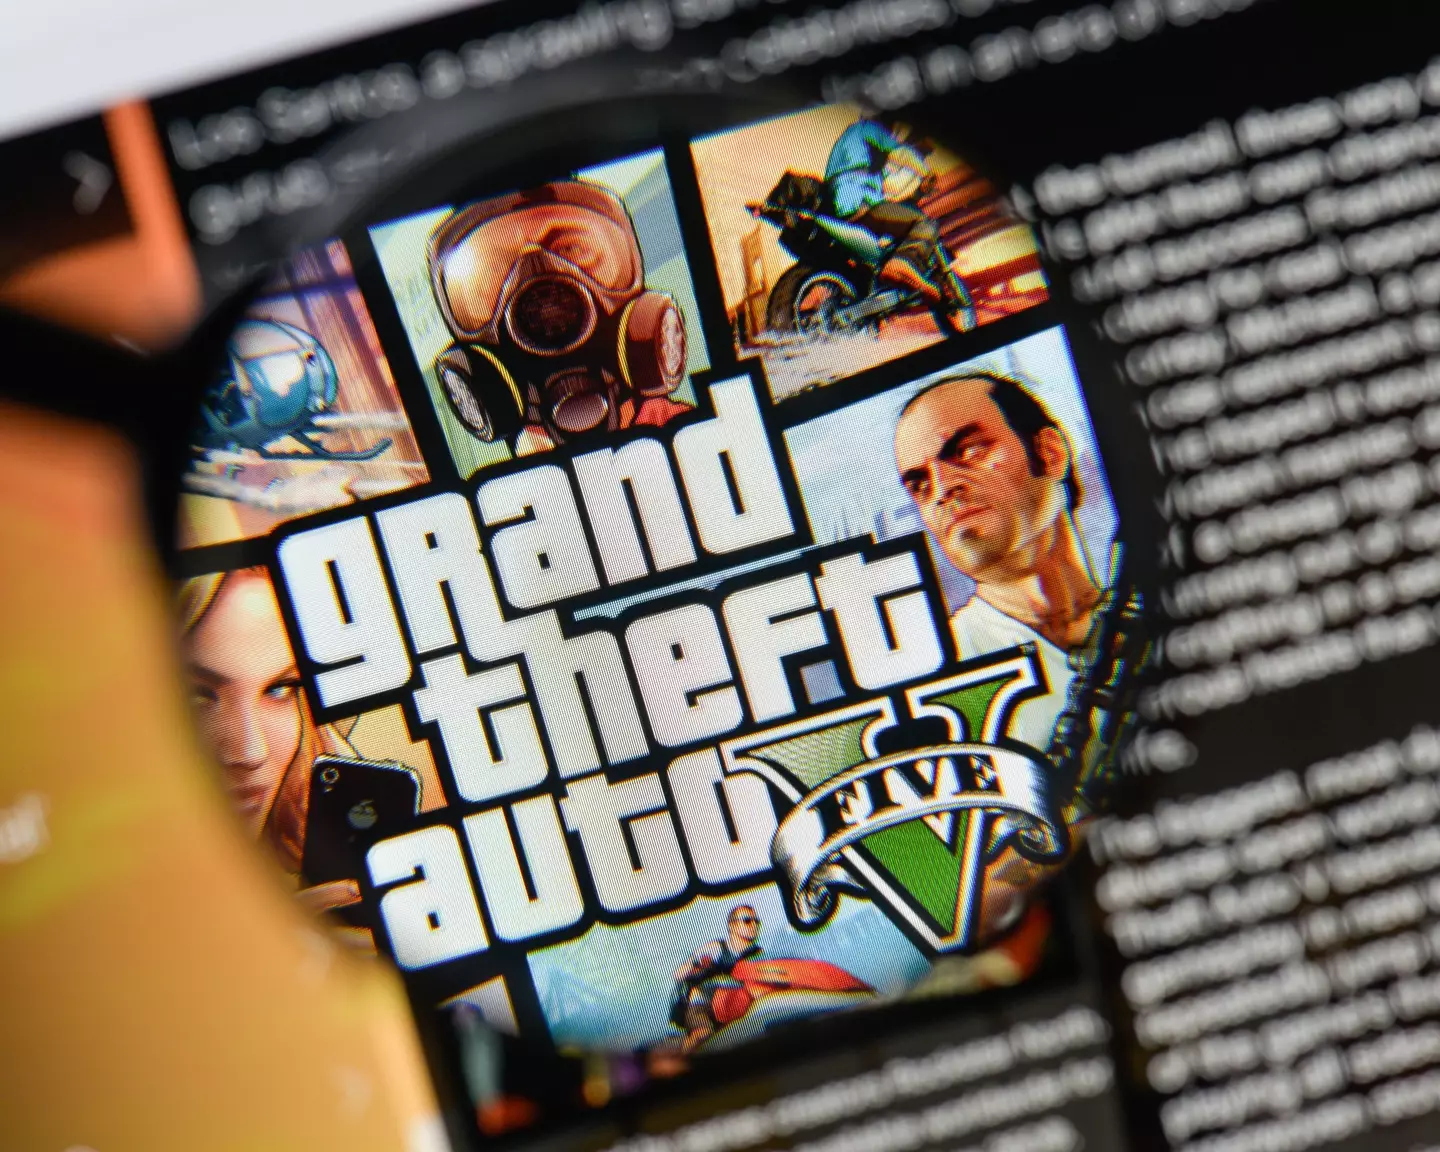 Rockstar Games appears to have started editing out transphobic content in its Grand Theft Auto V re-release, which dropped in March.